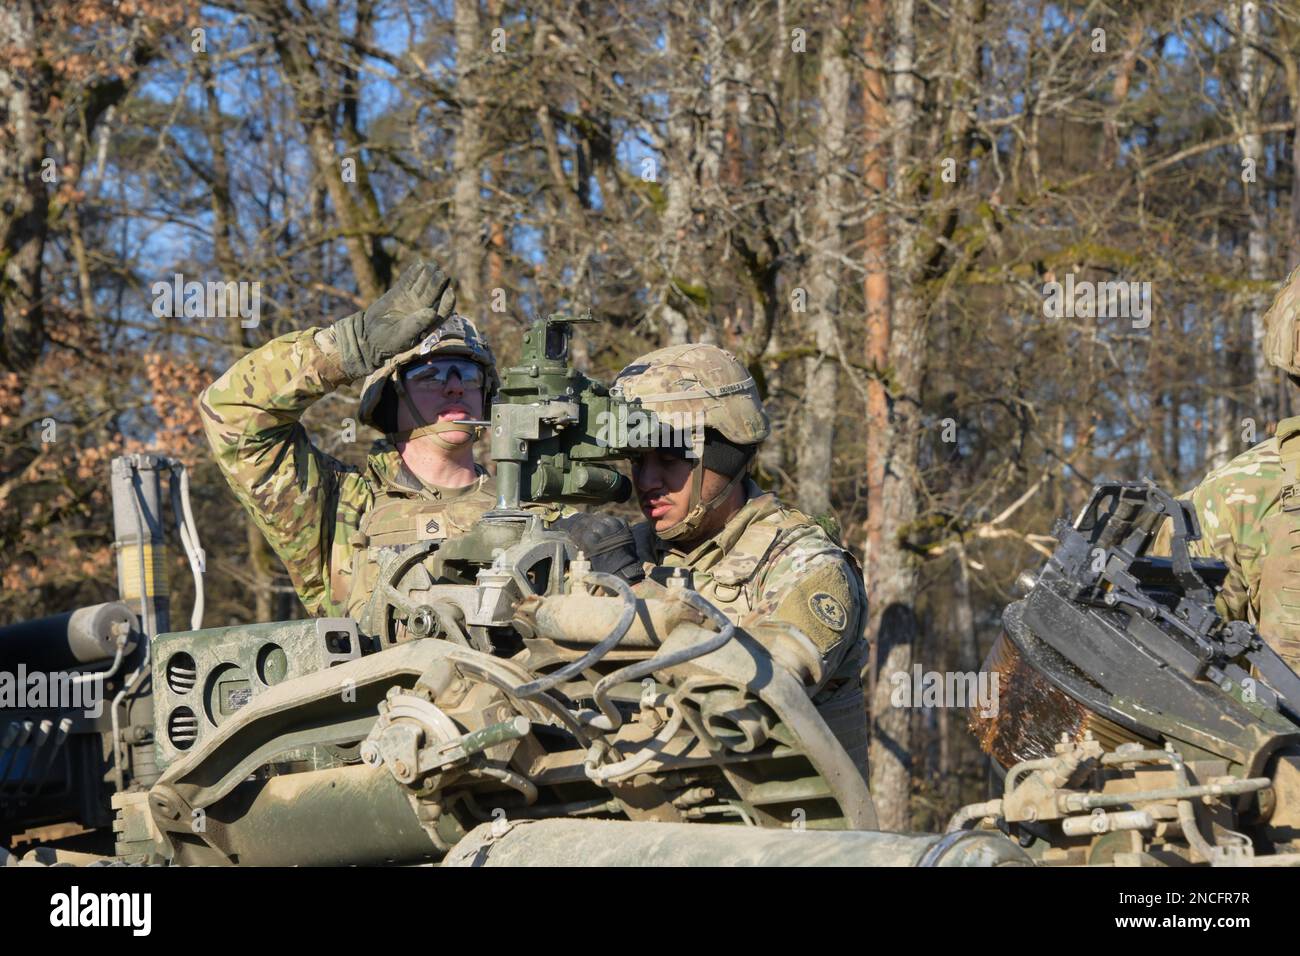 U.S. Soldiers assigned to Field Artillery Squadron, 2nd Cavalry Regiment aligns a M777 155mm howitzer to a targets coordinates during Table XVIII certifications as part of Dragoon Ready 23 exercise at the 7th Army Training Command’s Grafenwoehr Training Area, Germany, February 9, 2023. Dragoon Ready 23 is designed to ensure readiness and train the regiment in its mission-essential tasks in support of unified land operations to enhance proficiency and improve interoperability with NATO Allies. (U.S. Army photo by Spc. Ryan Parr) Stock Photo